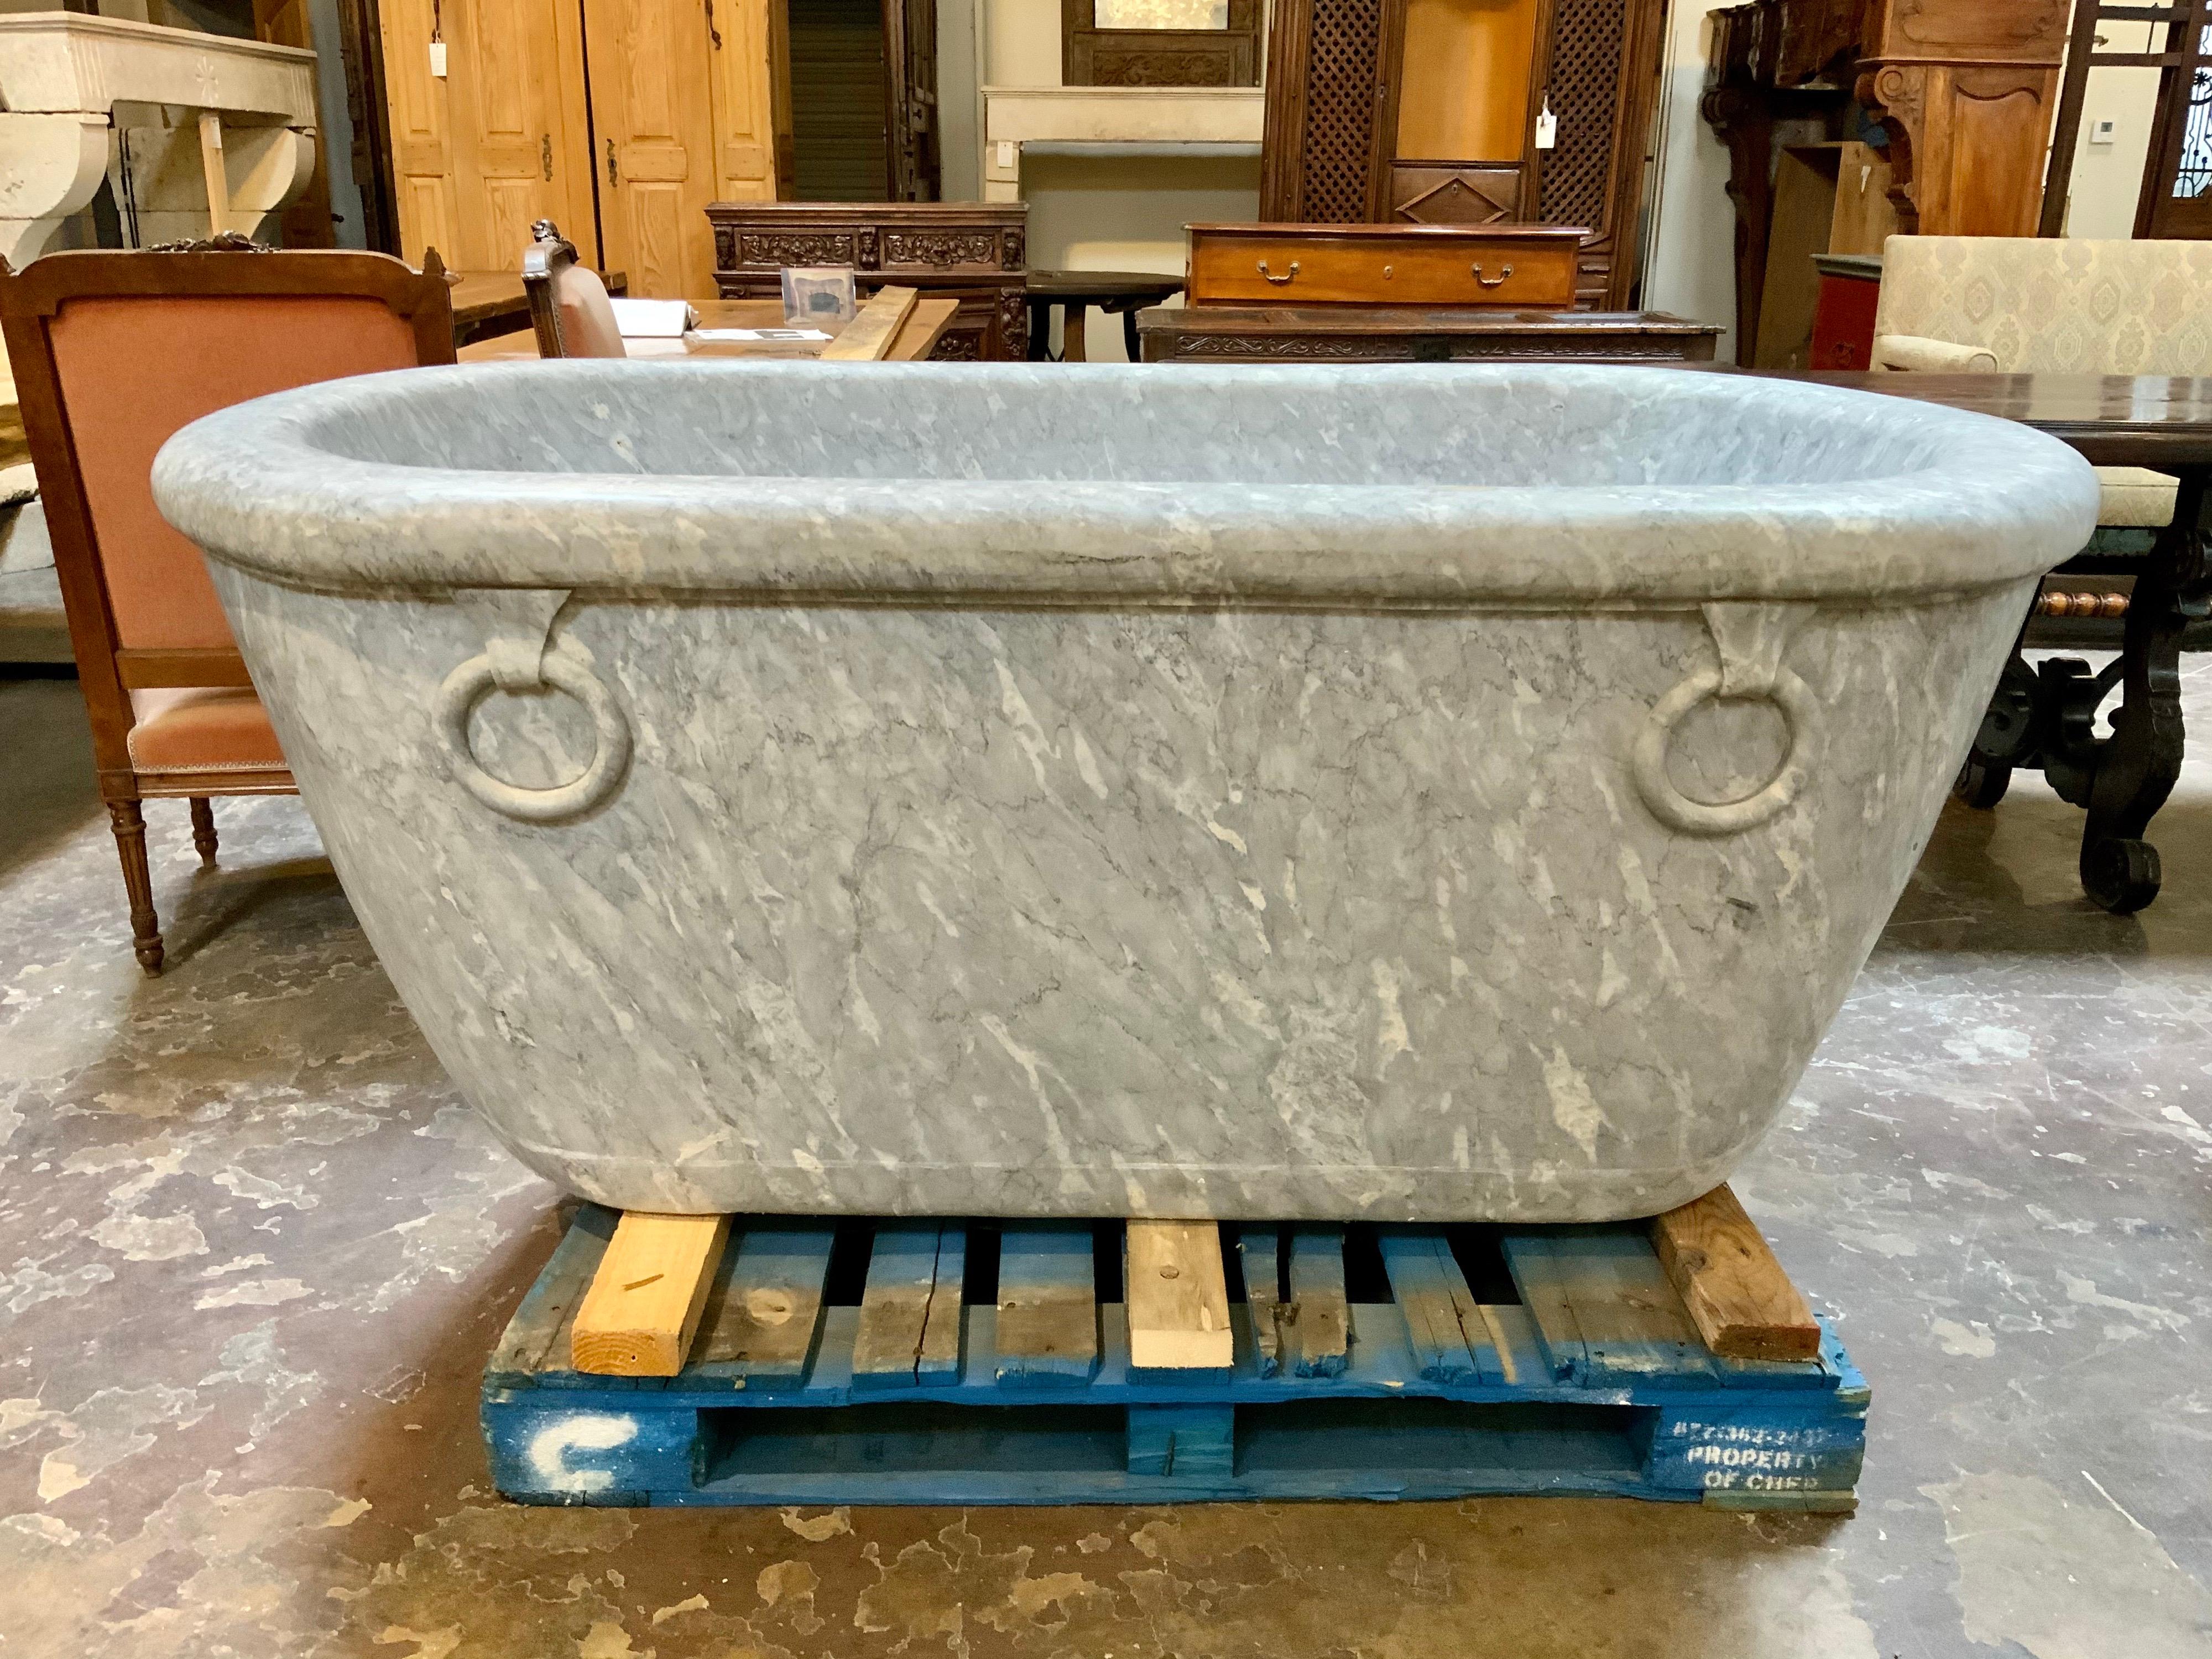 This marble basin tub origins from Italy, circa 1880.